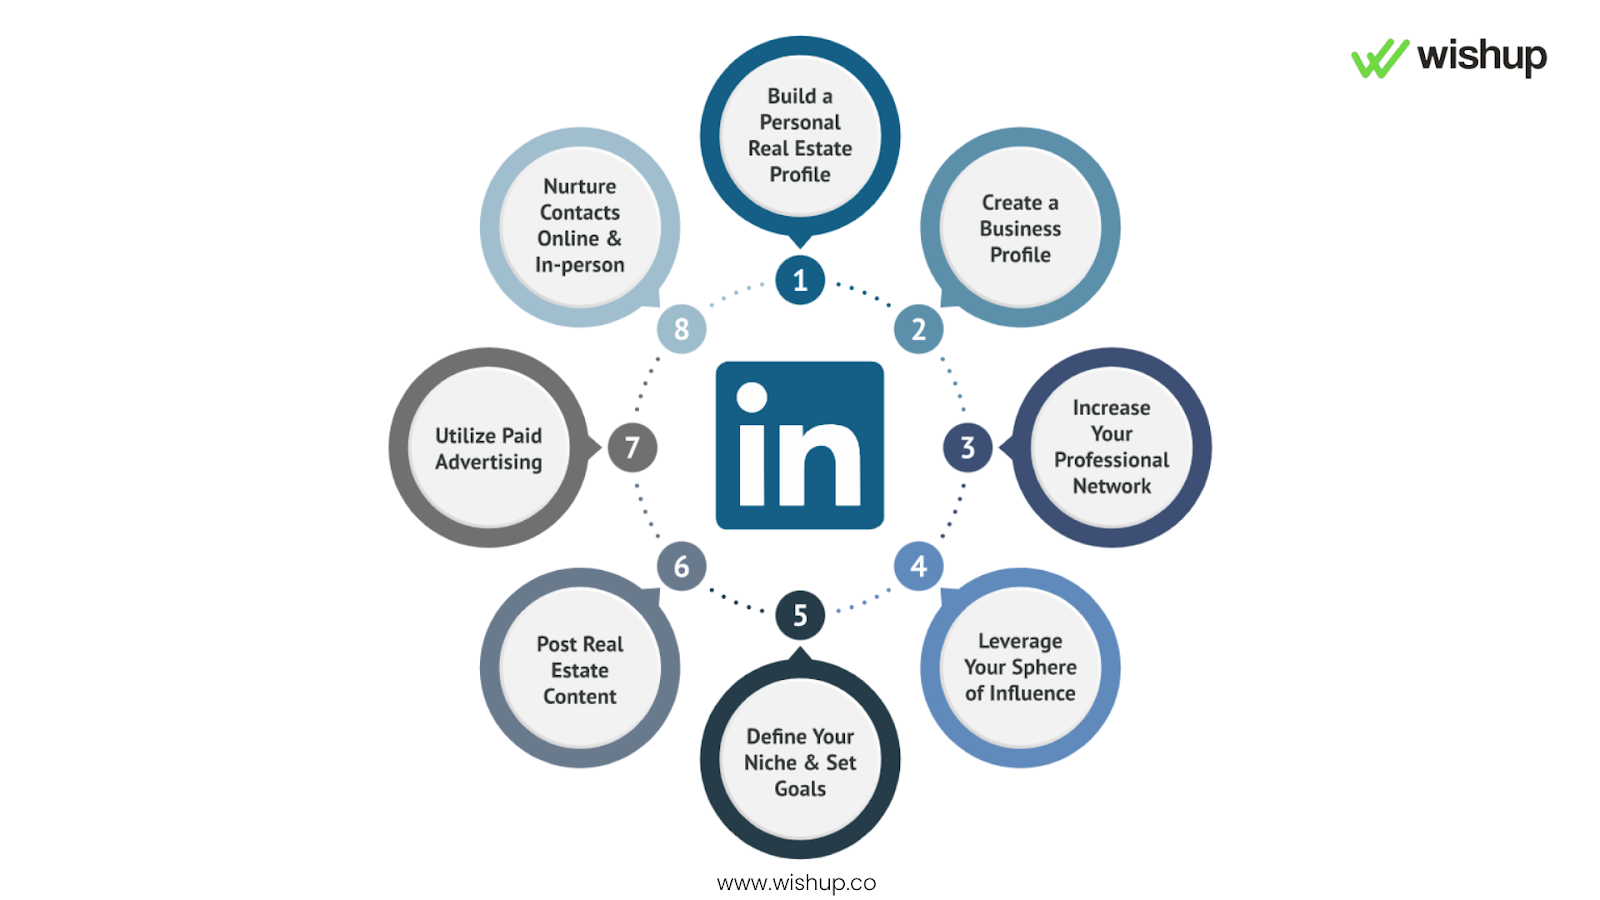 Use LinkedIn for real estate leads